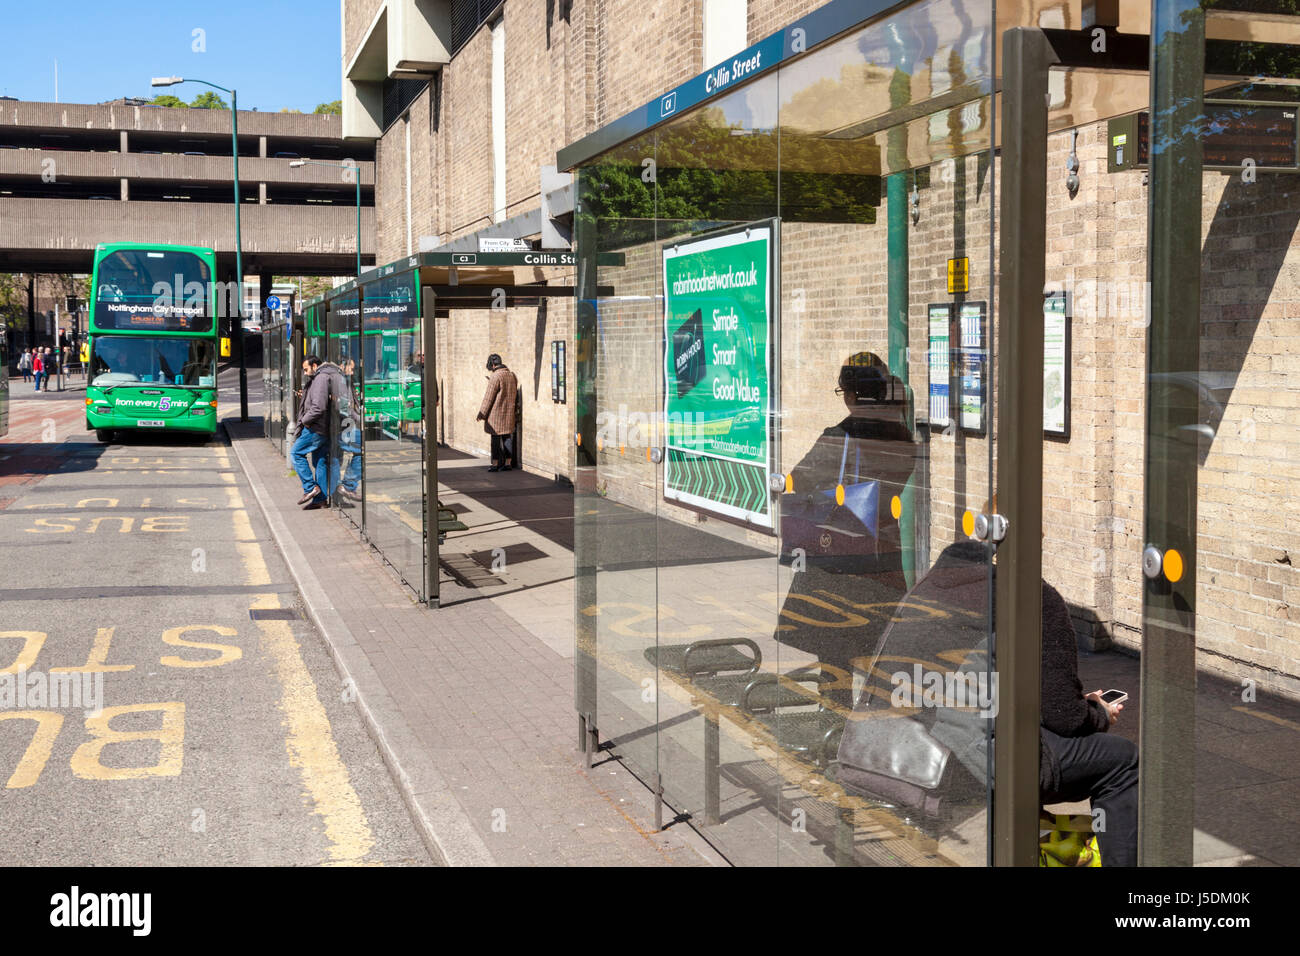 People waiting at a bus stop. A section of a street with several bus stops serving many bus services, Nottingham, England, UK Stock Photo